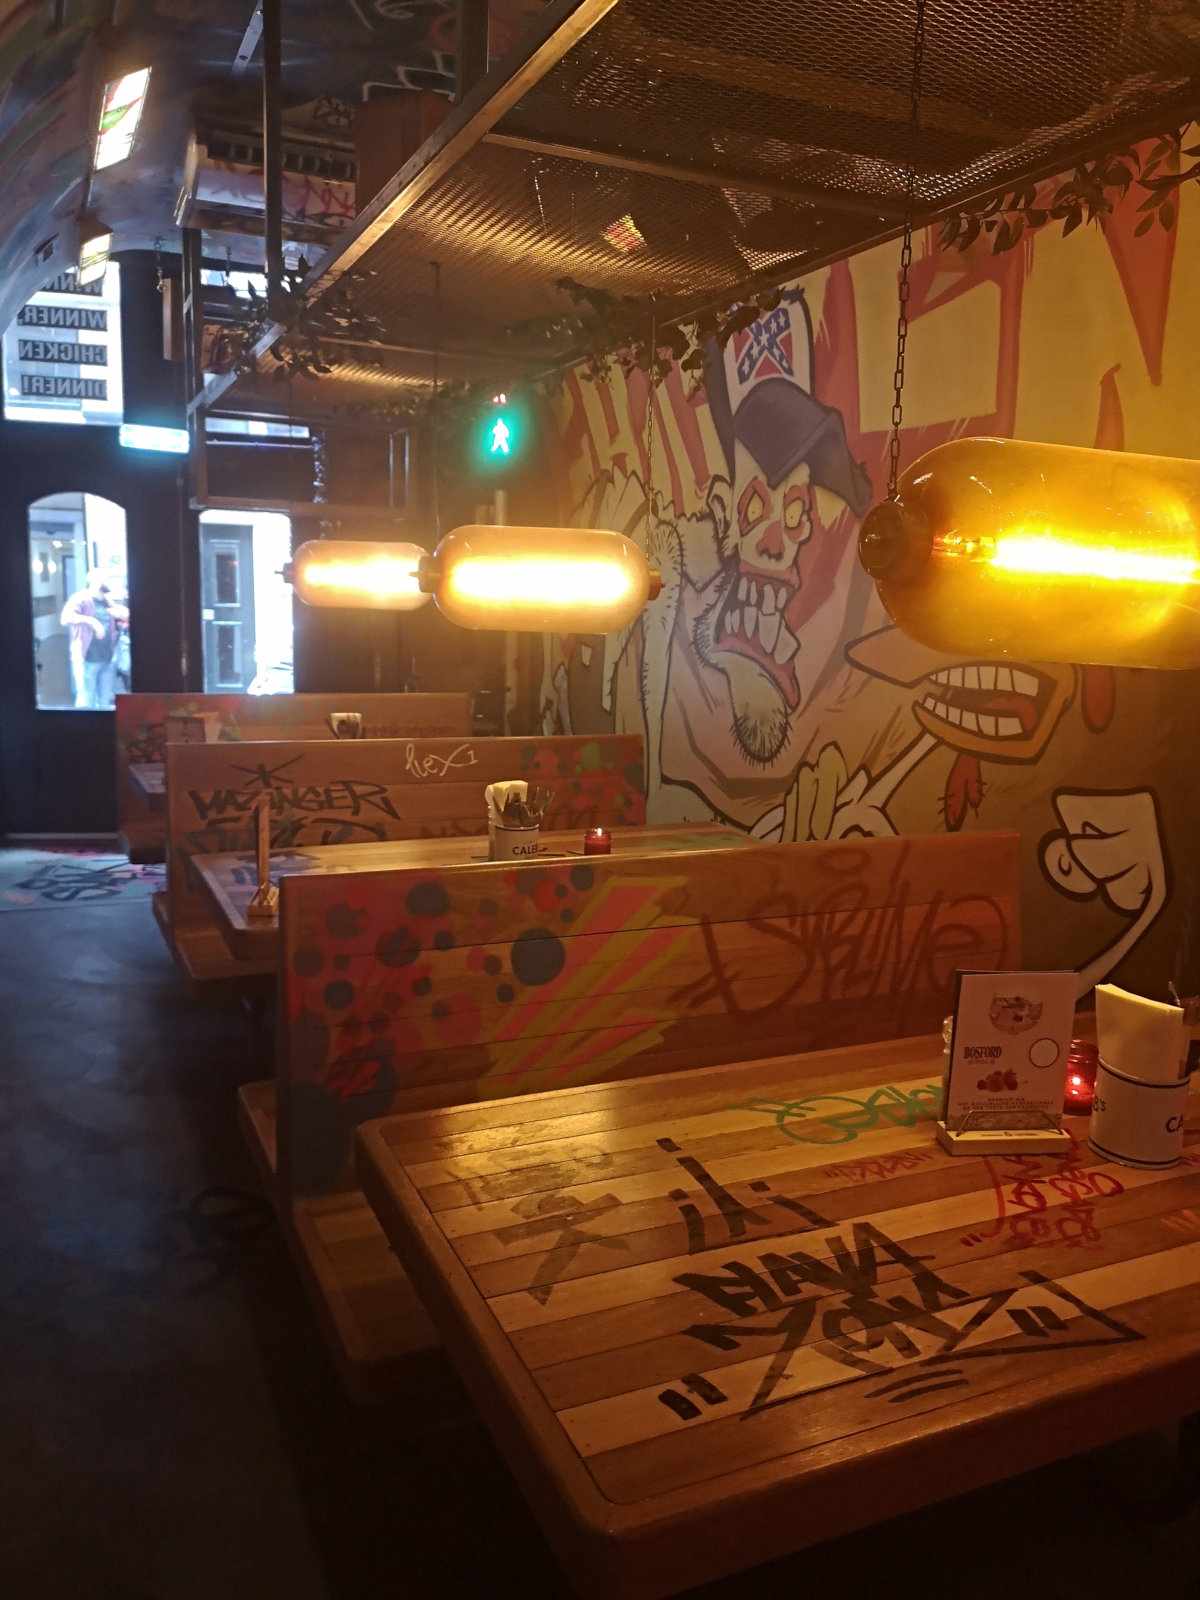 The Dirty Chicken Club is one of the coolest places to eat in Amsterdam